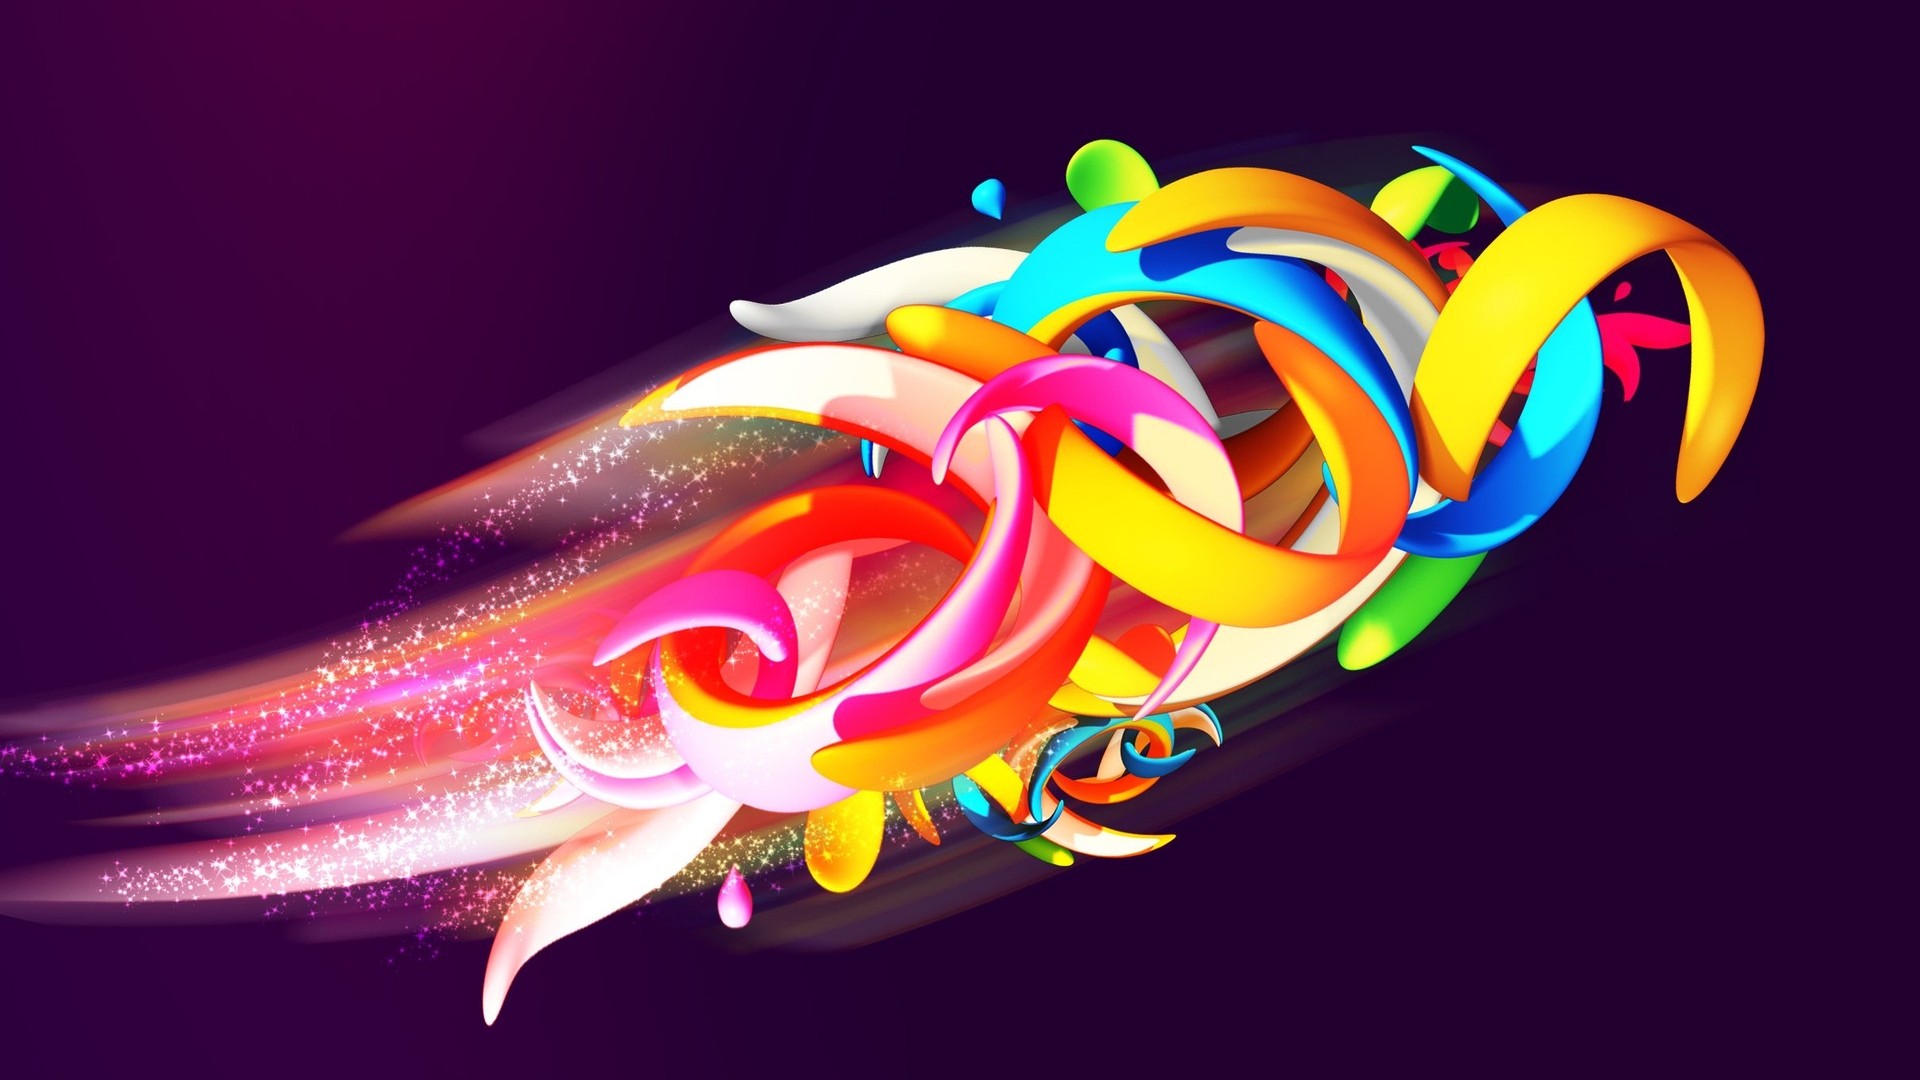 Colorful Shapes Abstract Desktop Wallpaper